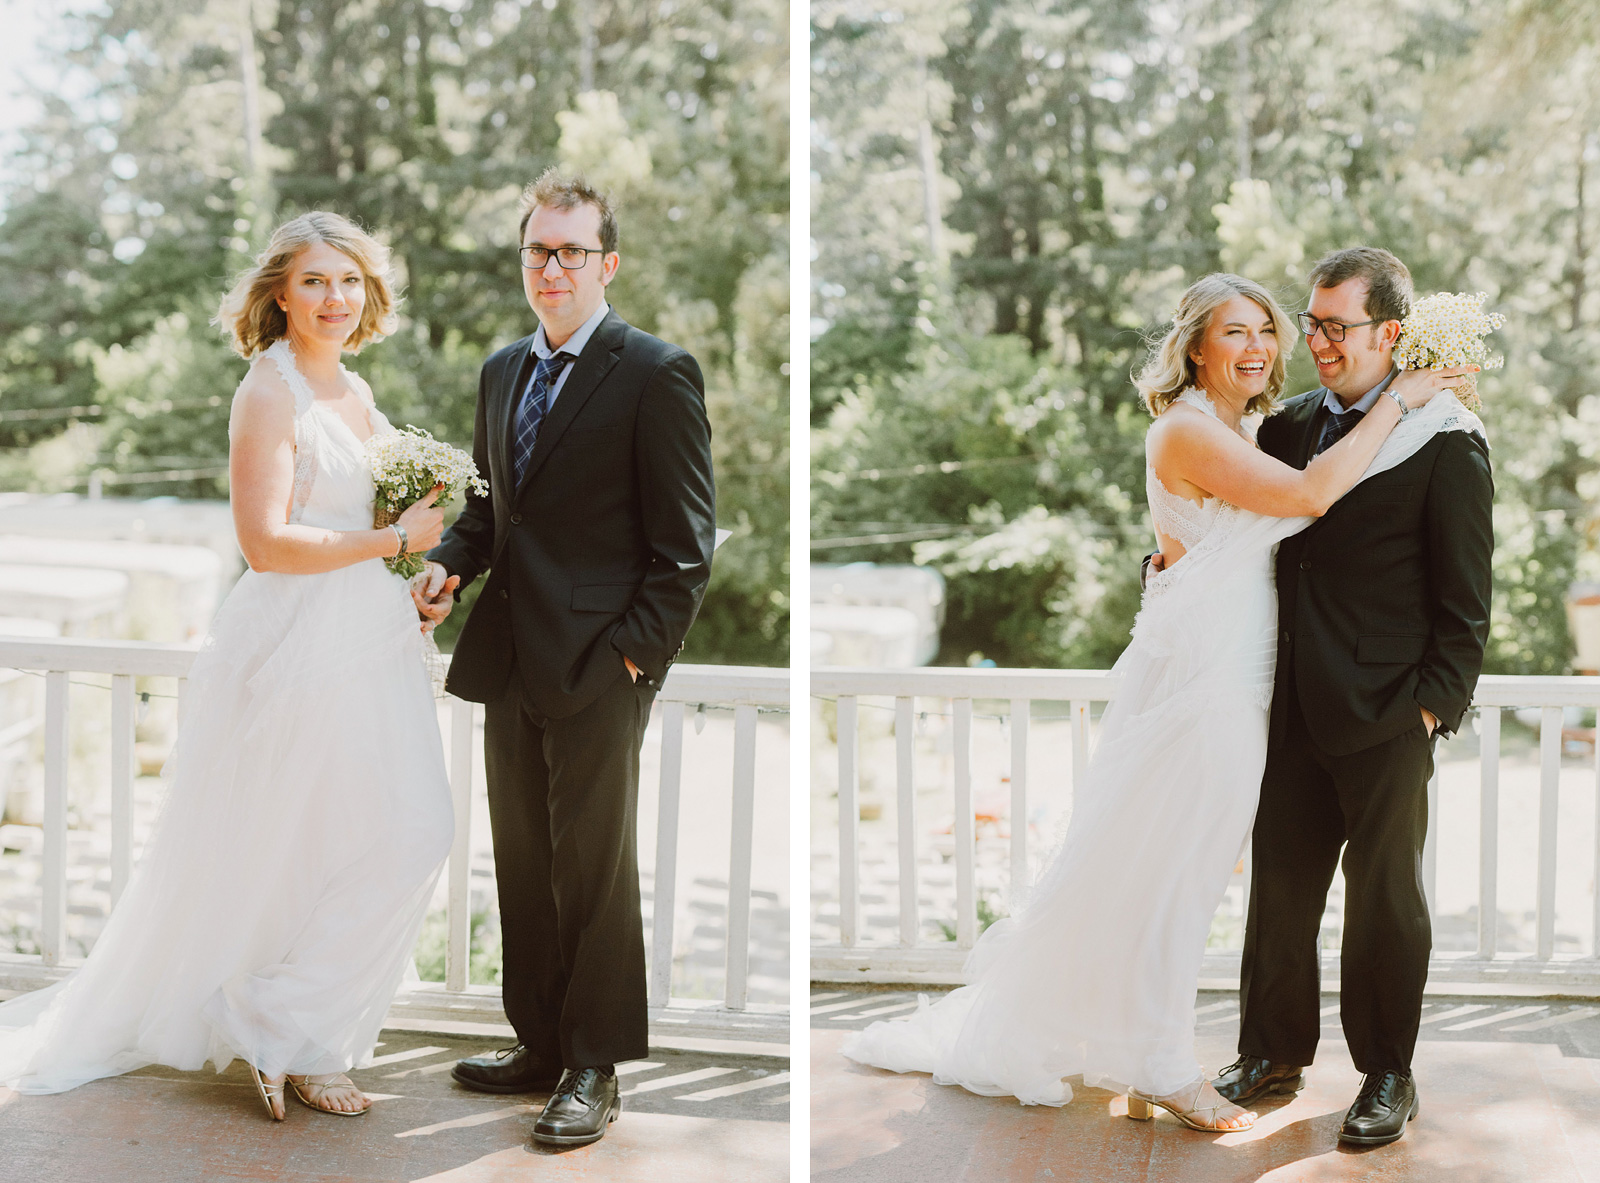 Portraits of bride and groom on the balcony at a SouWester Wedding in Seaview, WA